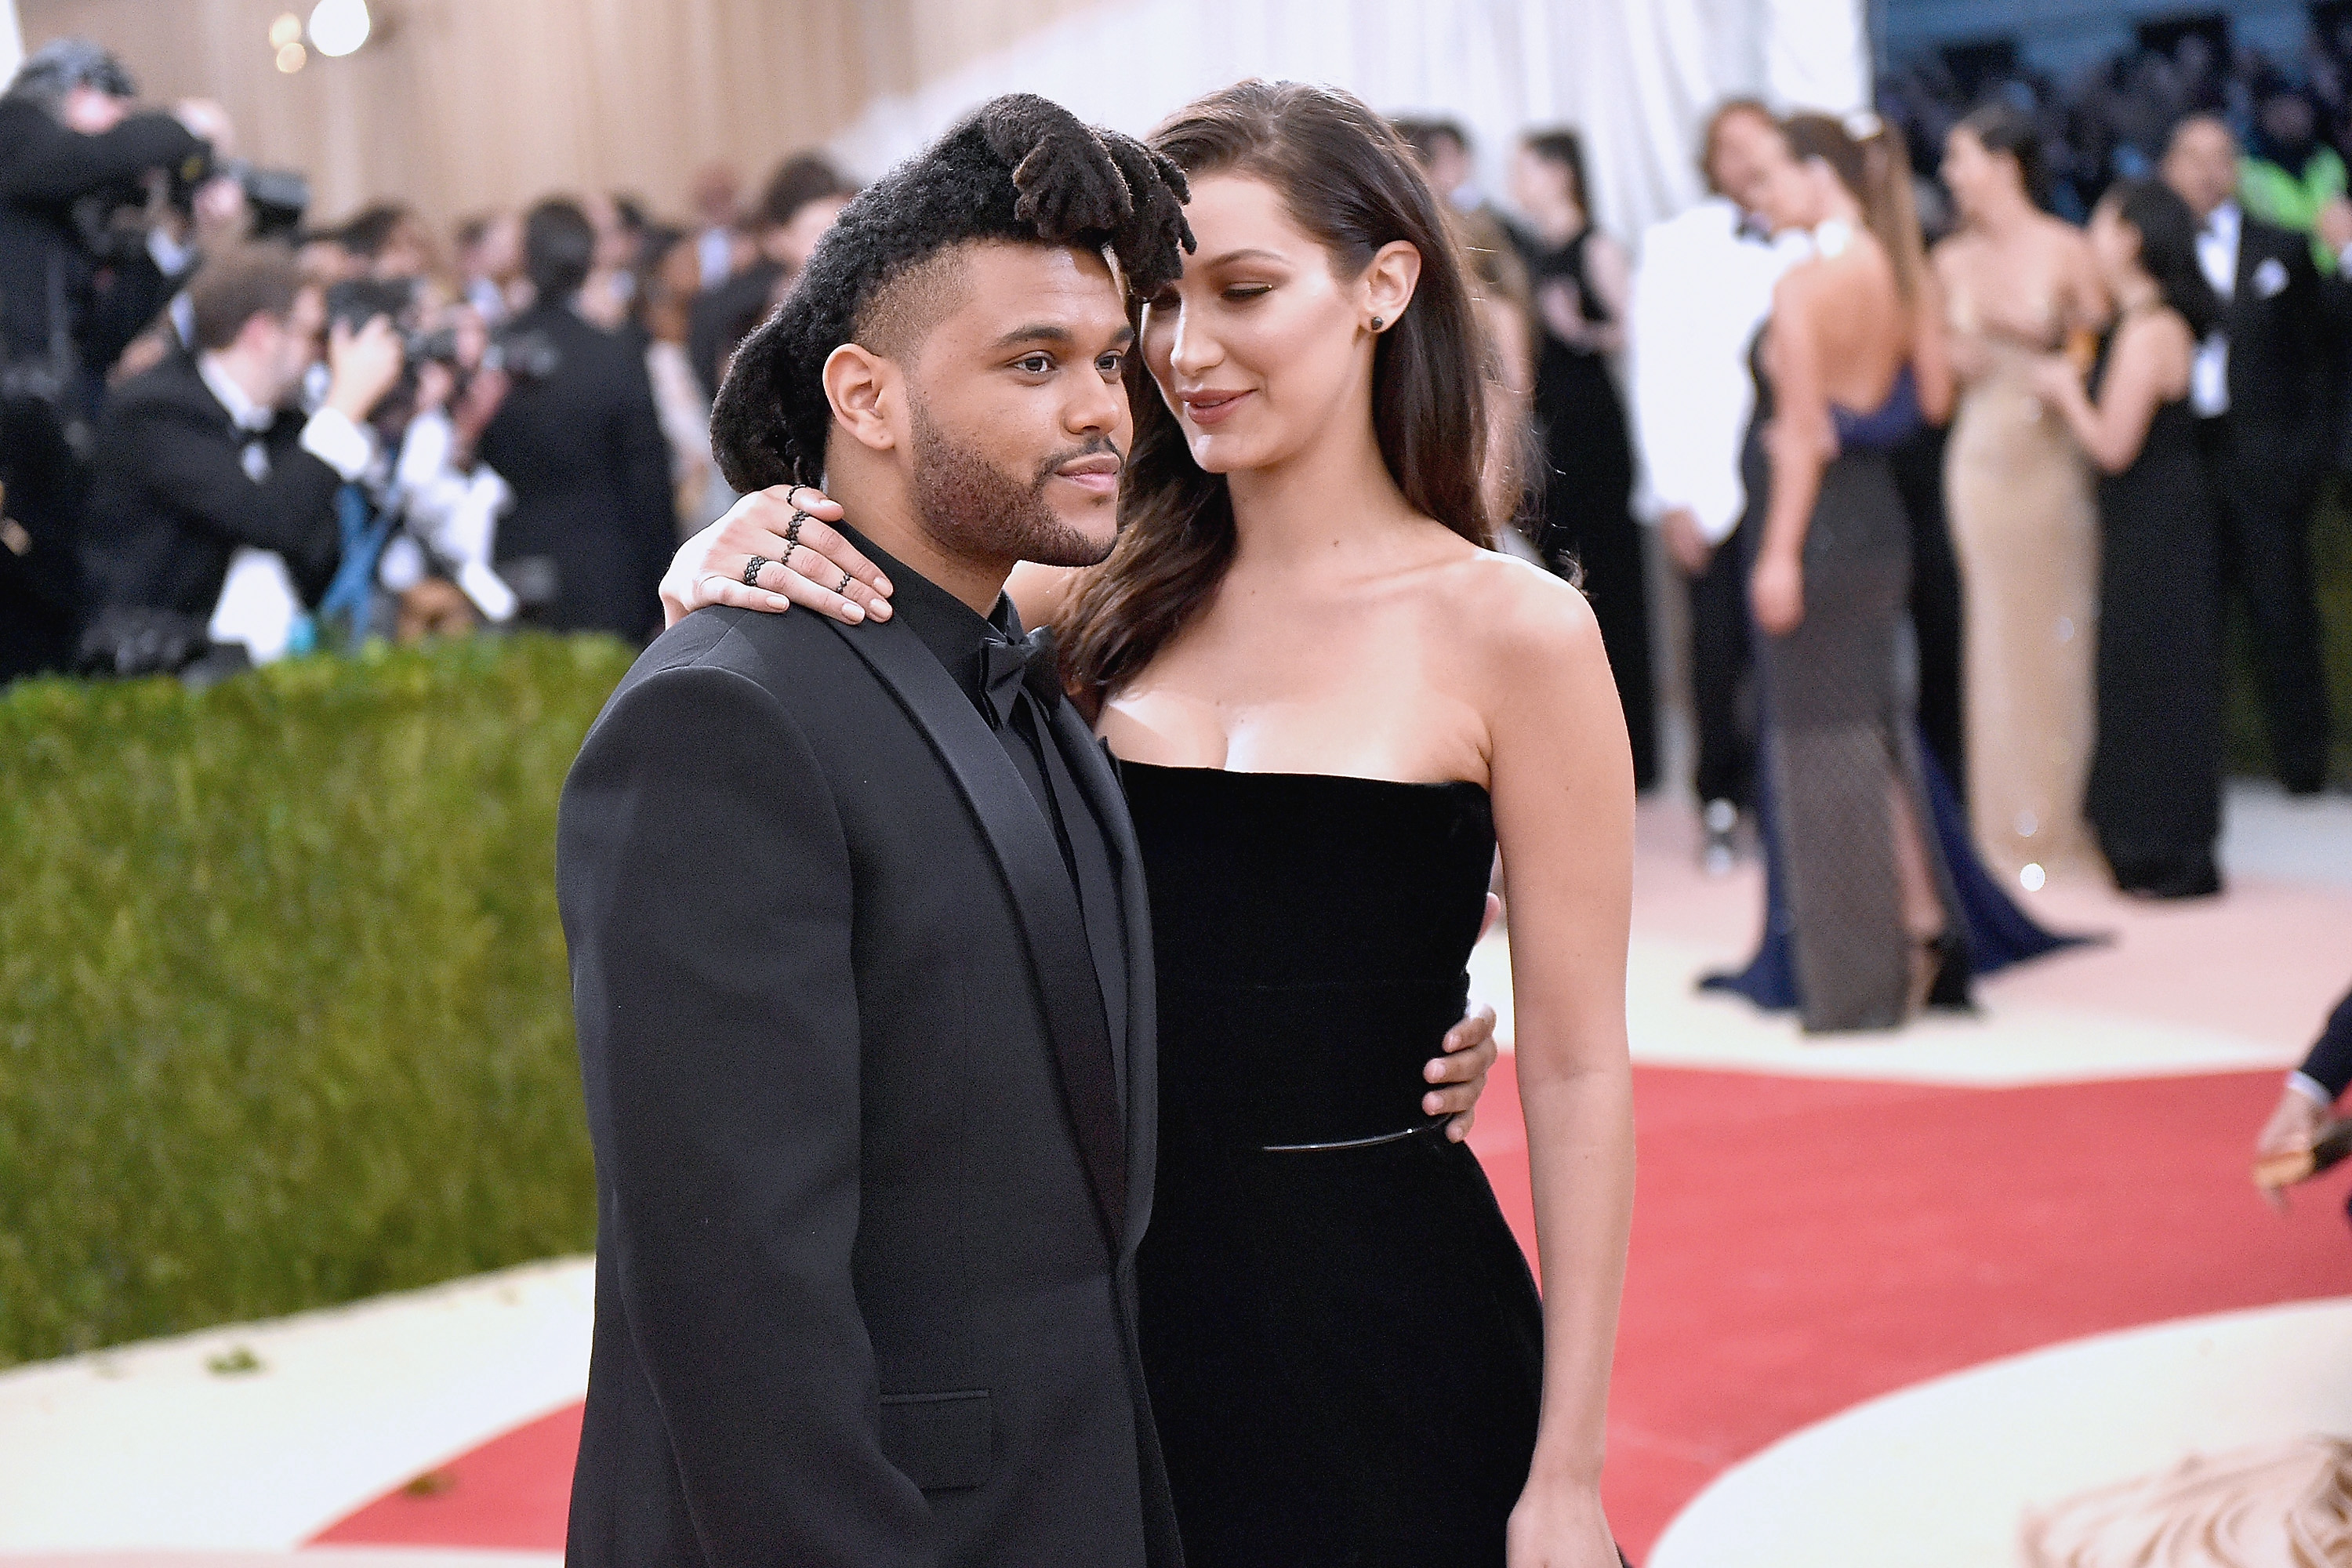 The Weeknd and Bella Hadid at Metropolitan Museum of Art on May 2, 2016. (Photo by Mike Coppola/Getty)